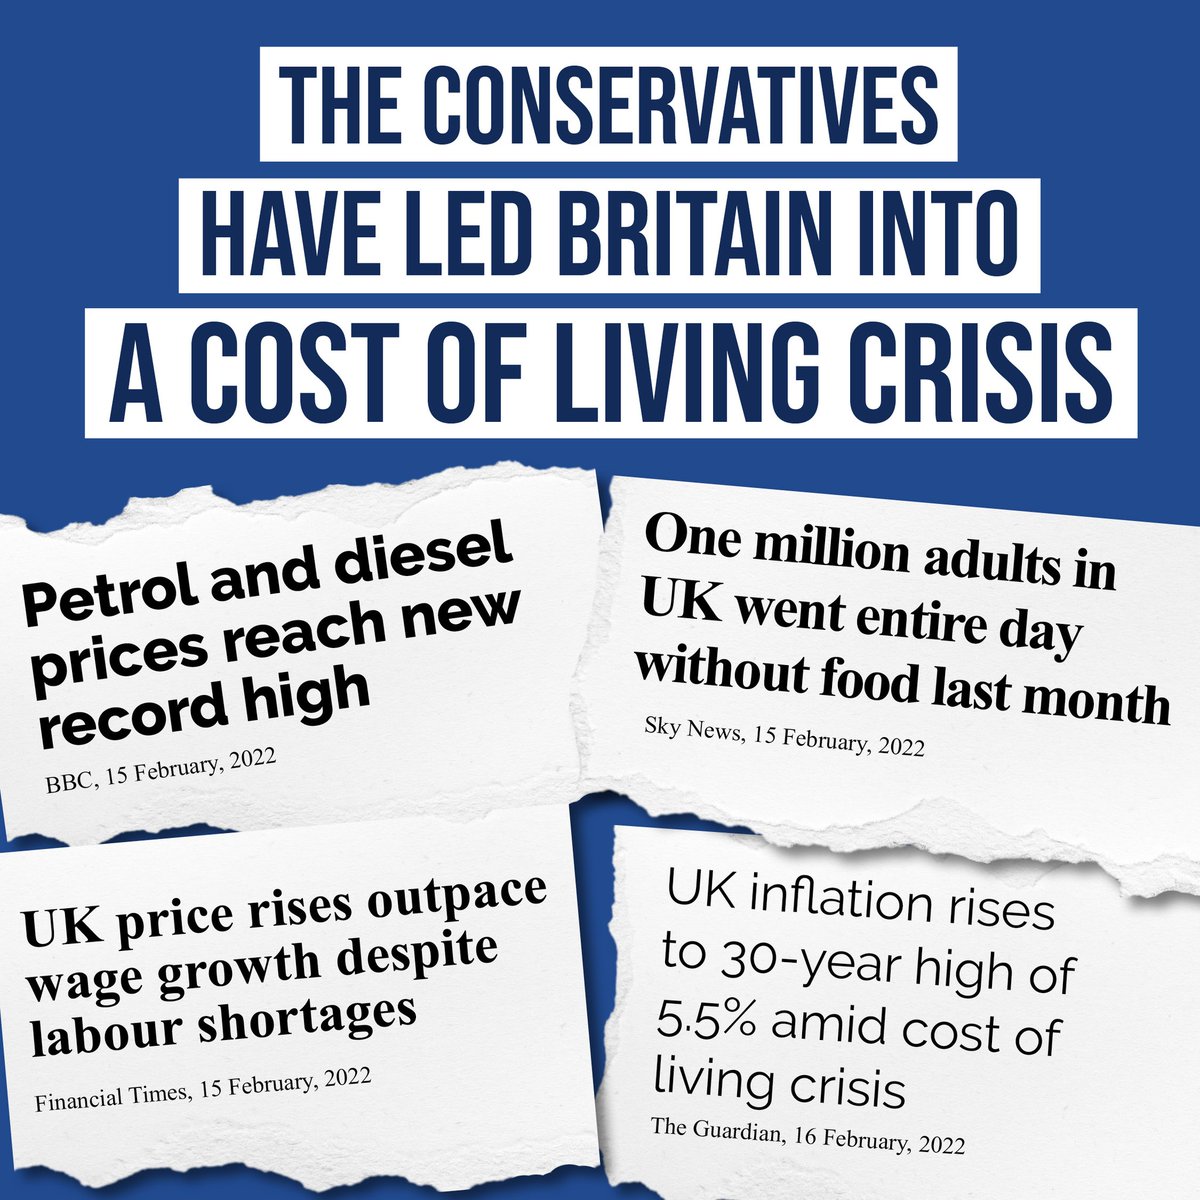 Cost of living crisis will never be ended if we have a Tory Party. They have not sorted in 14yrs • Housing/homelessness • Pay rises • NHS wait times • Social Care • Islamaphobia • Climate Outcome • Transport • Brexit They have done nothing! #trevorphillips #bbclaurak